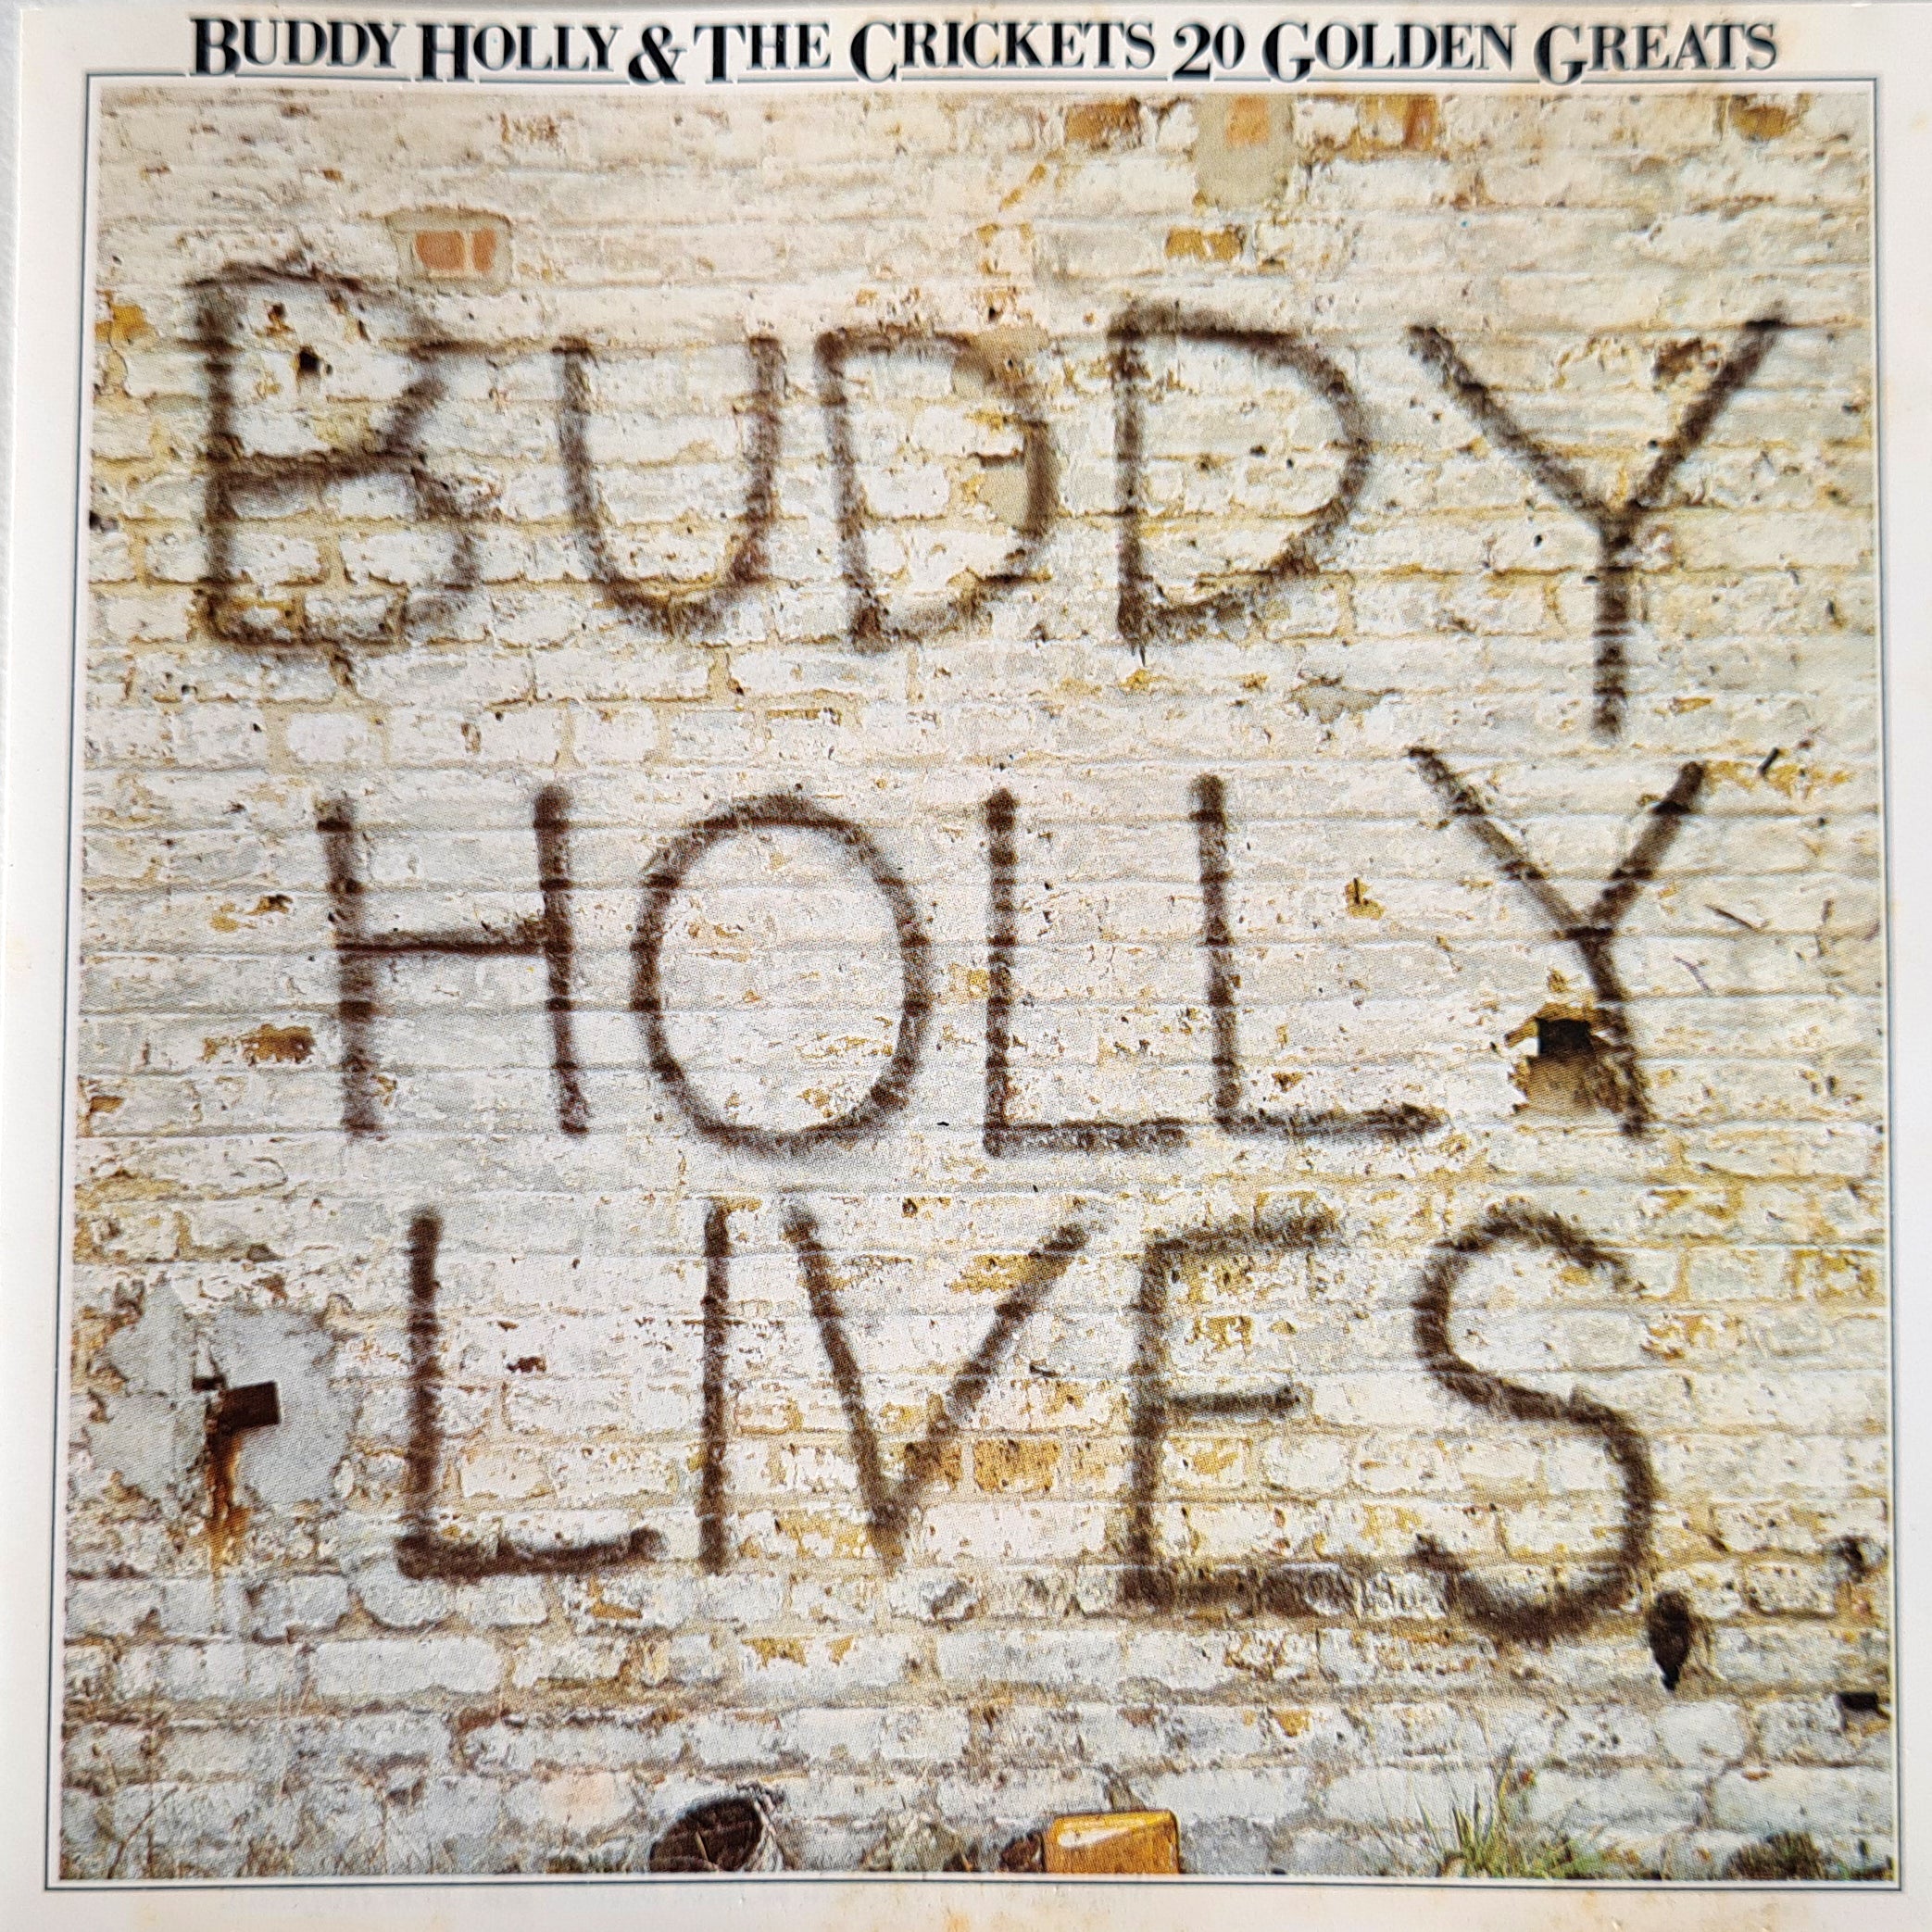 Buddy Holly & The Crickets - 20 Golden Greats (CD)